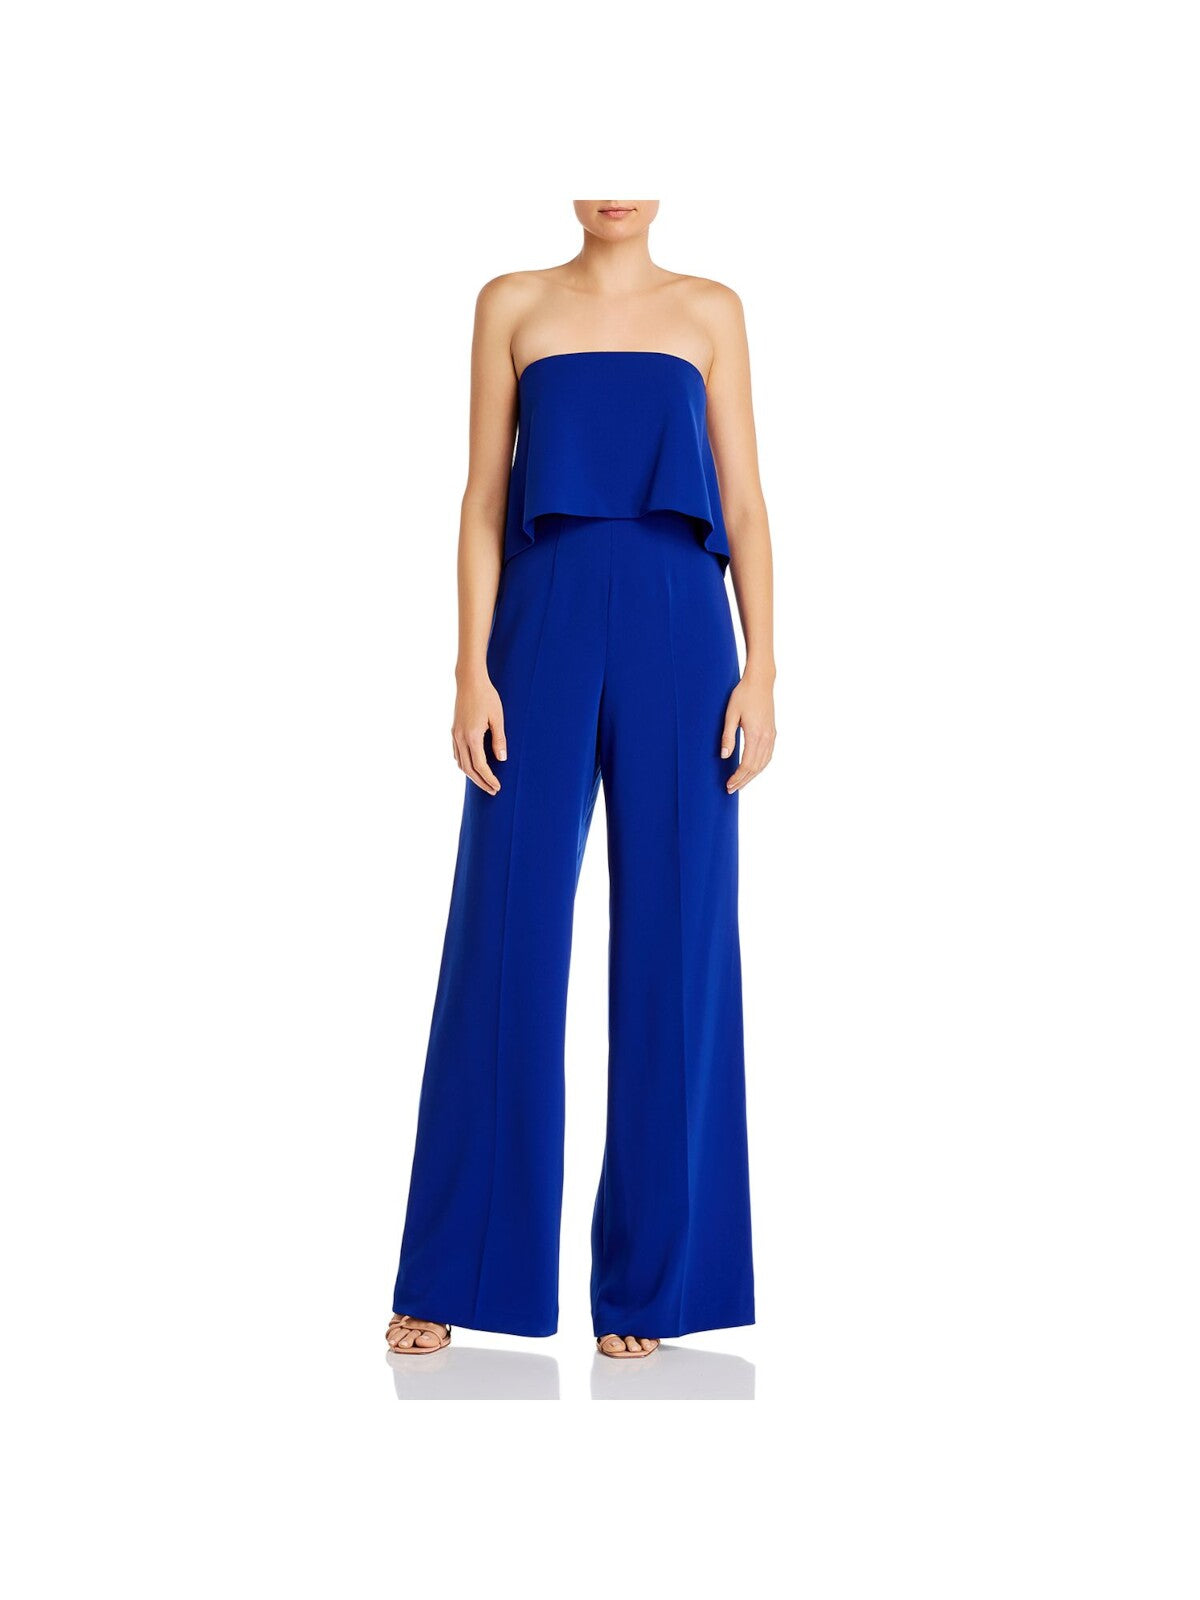 JAY GODFREY Womens Stretch Zippered Cut Out Popover Strapless Evening Wide Leg Jumpsuit